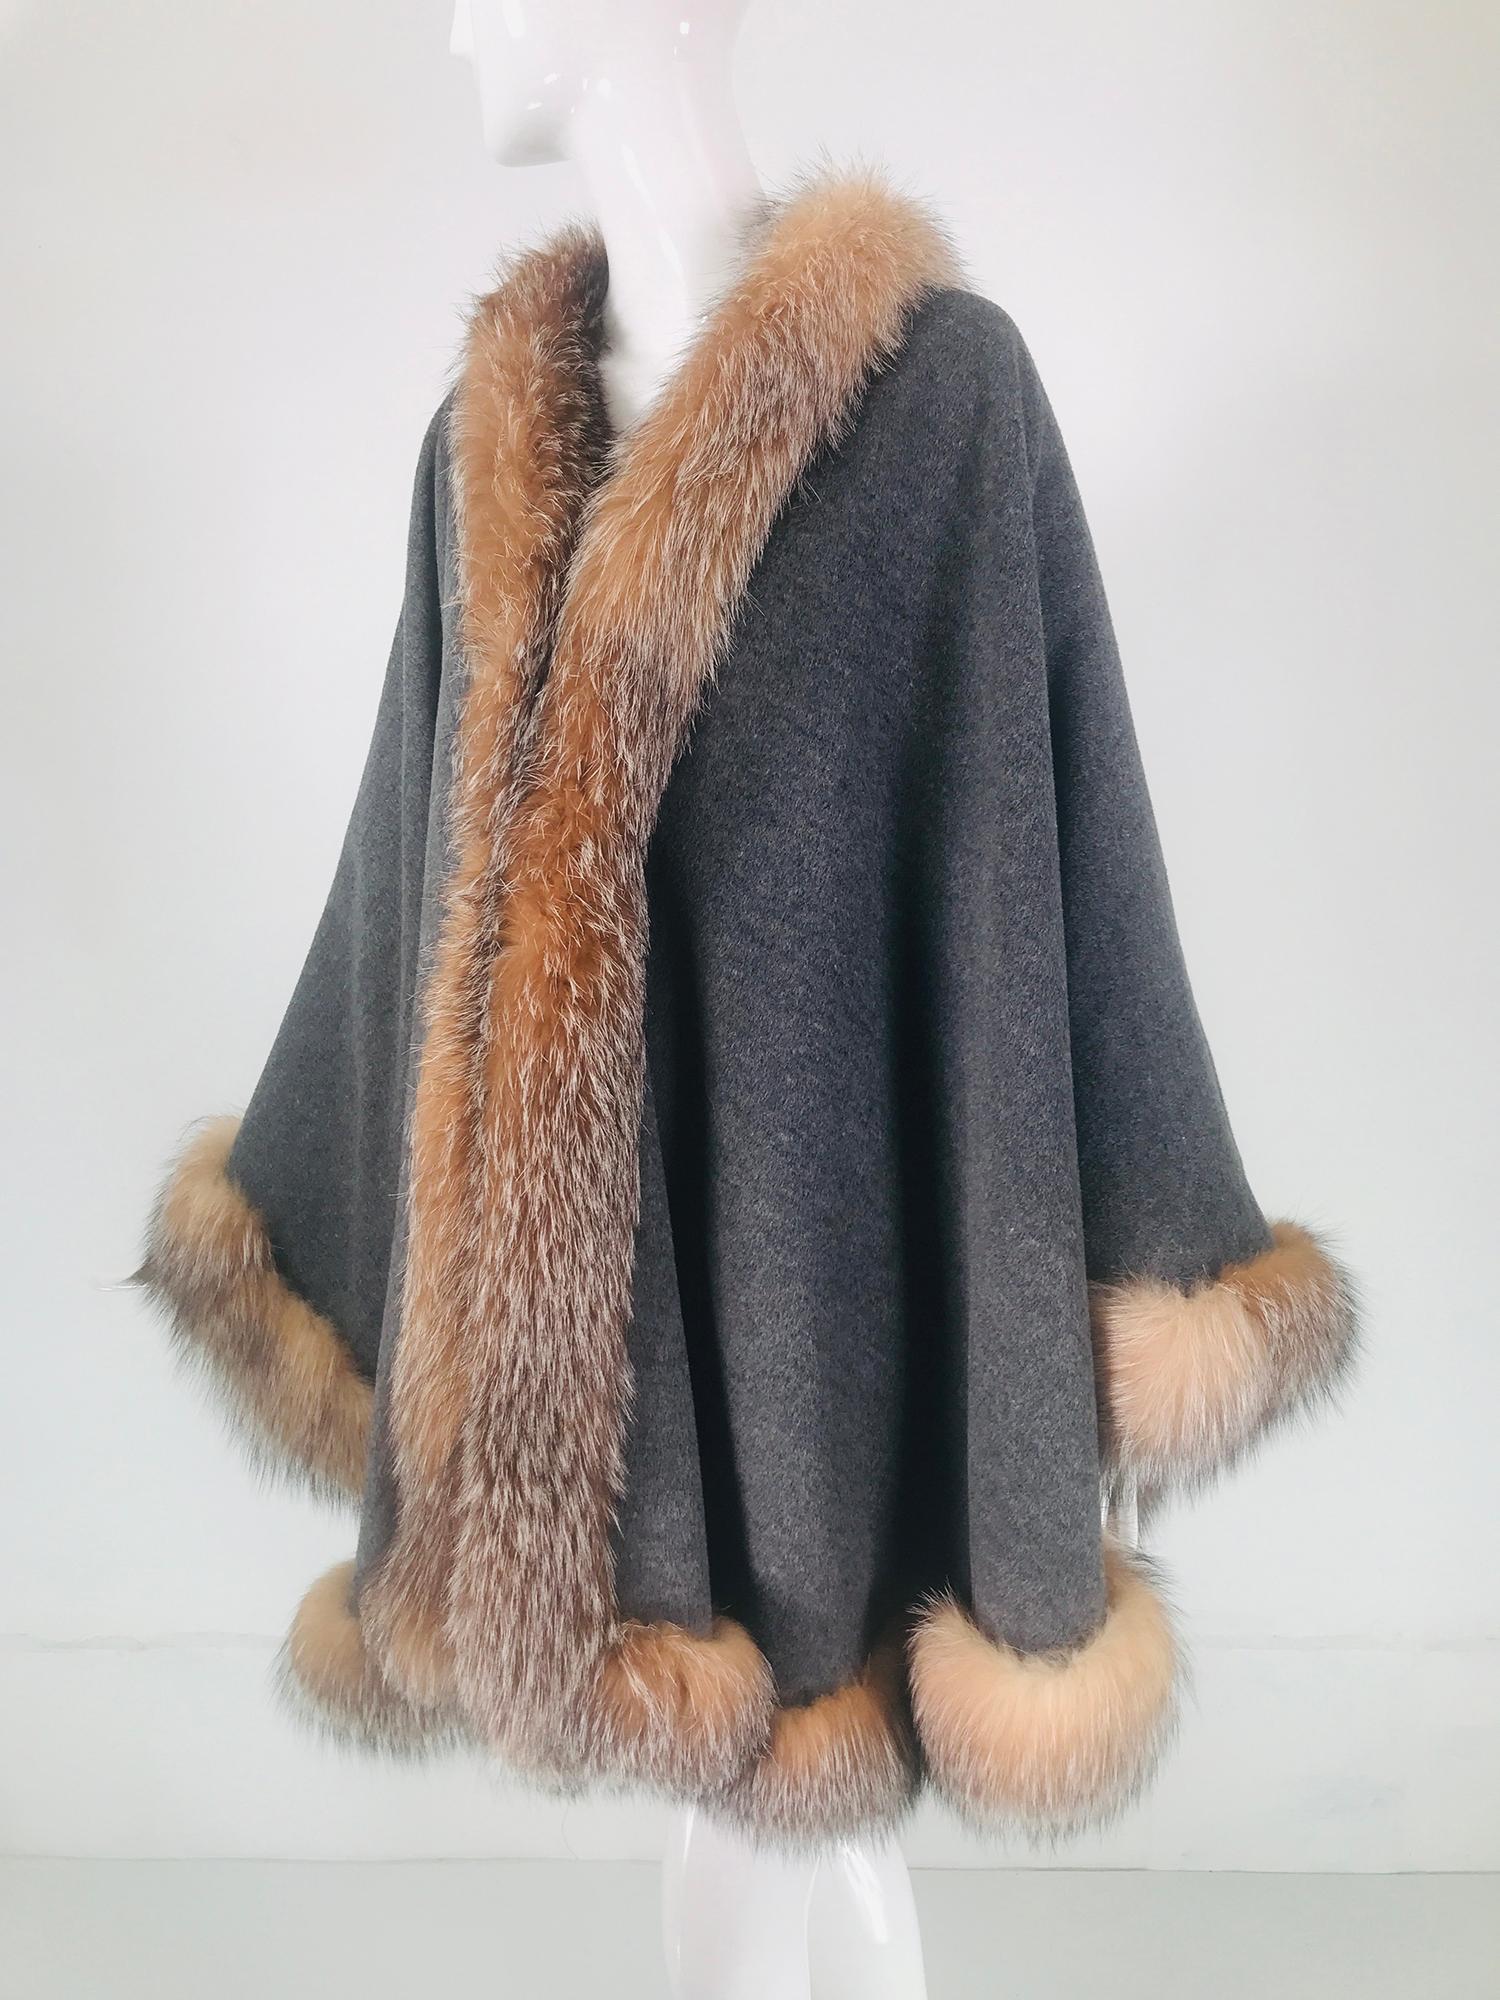 Sprung Freres Paris Red Fox Wool/Cashmere Reversible Cape Grey/Camel Tan OS 11